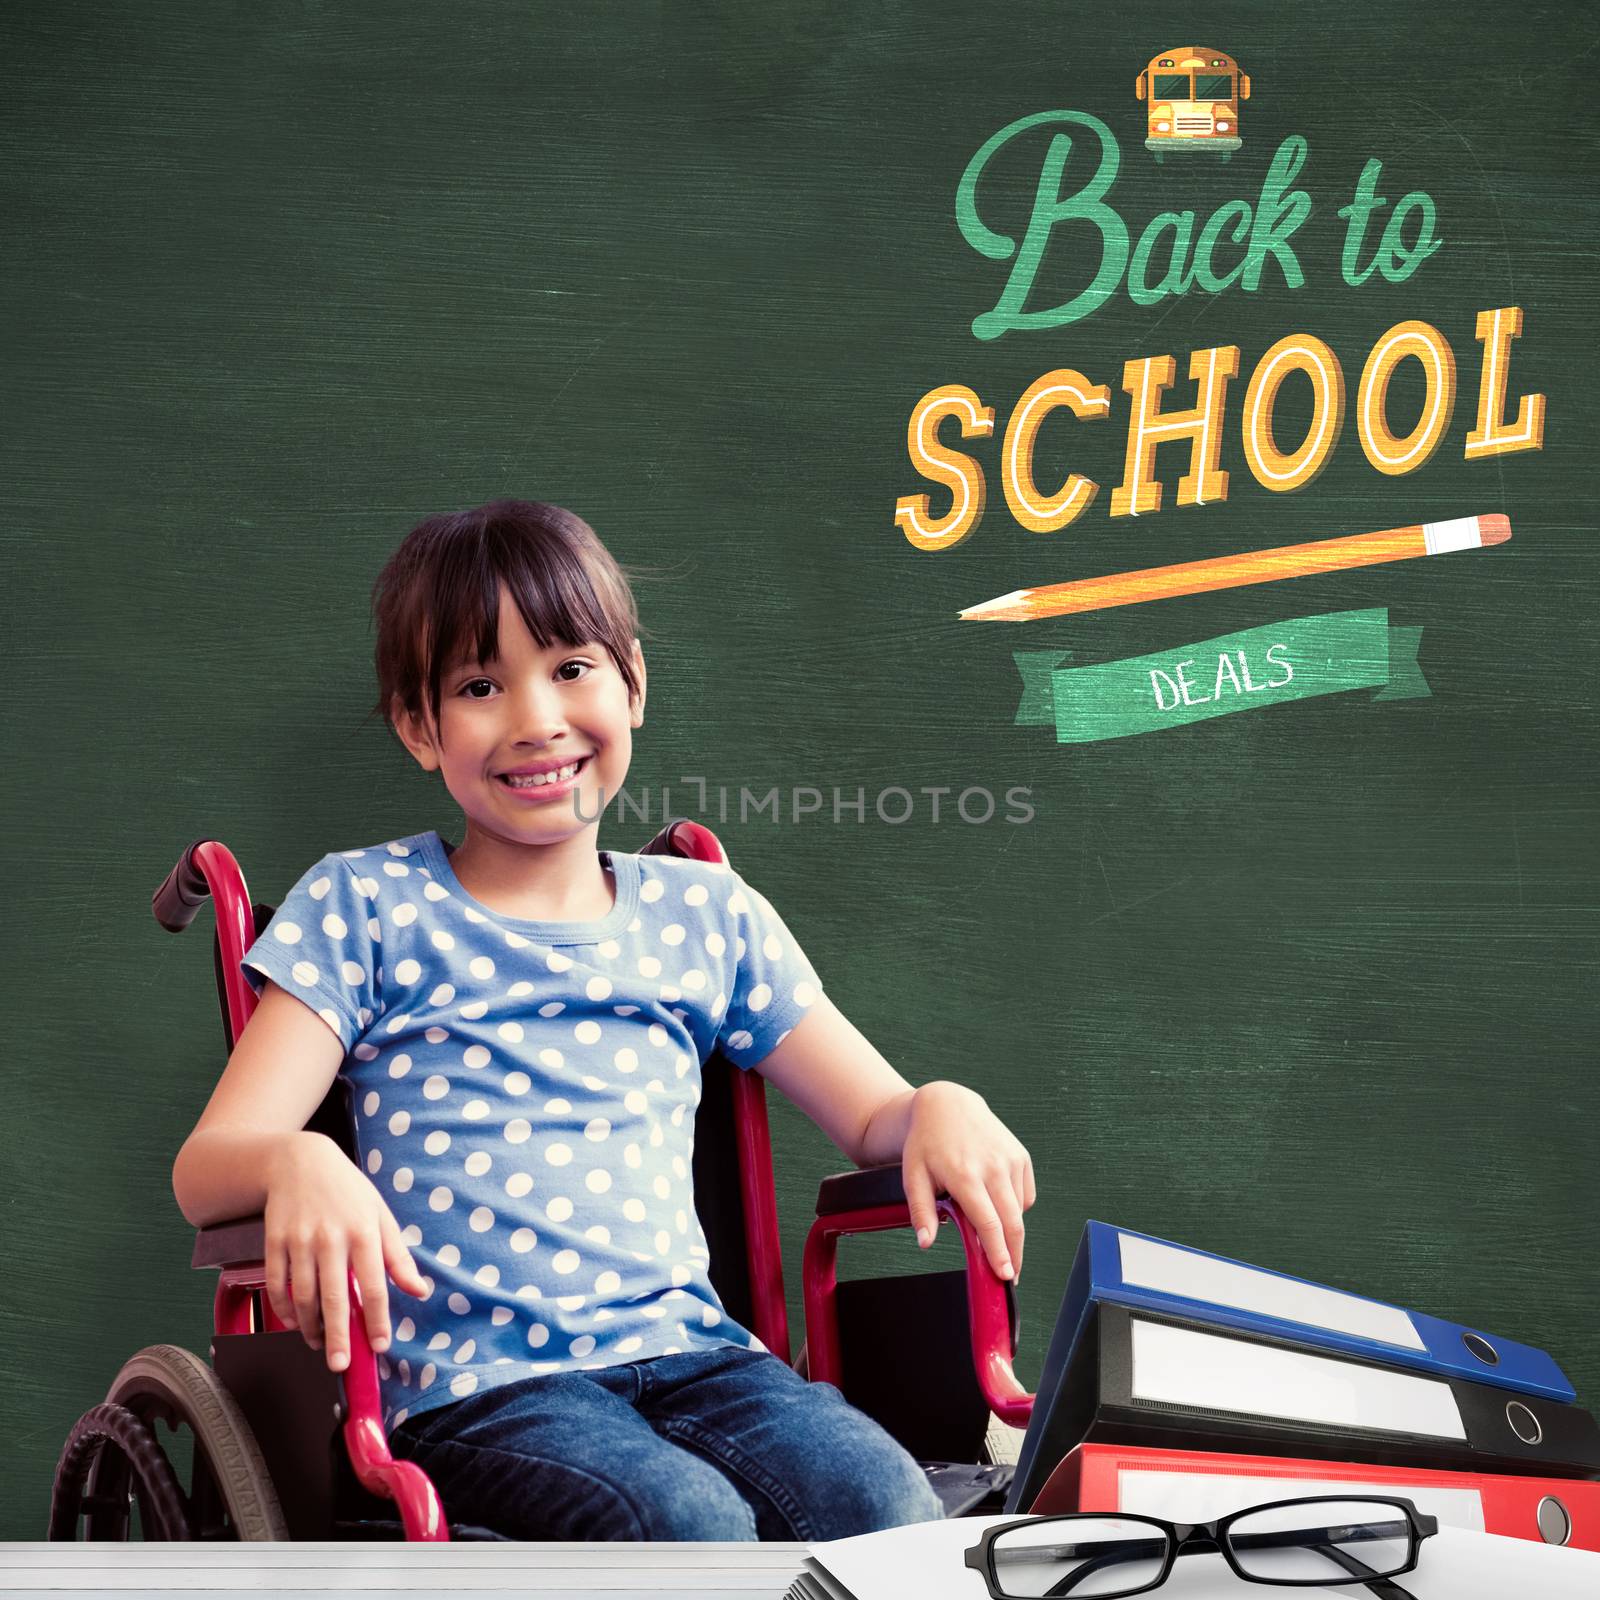 Cute disabled pupil smiling at camera in hall  against green chalkboard